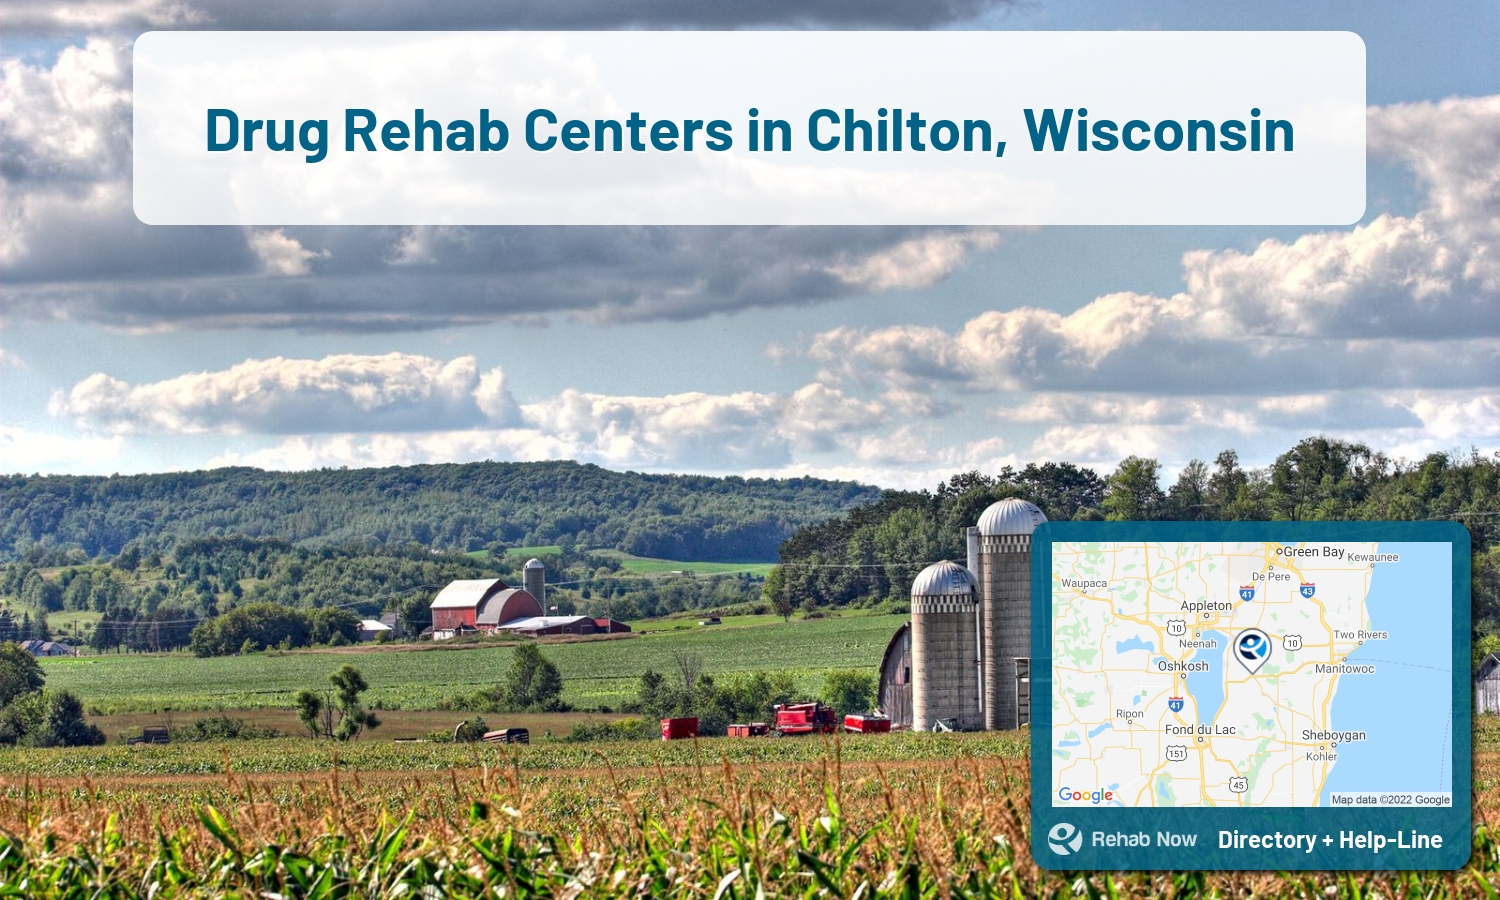 Chilton, WI Treatment Centers. Find drug rehab in Chilton, Wisconsin, or detox and treatment programs. Get the right help now!